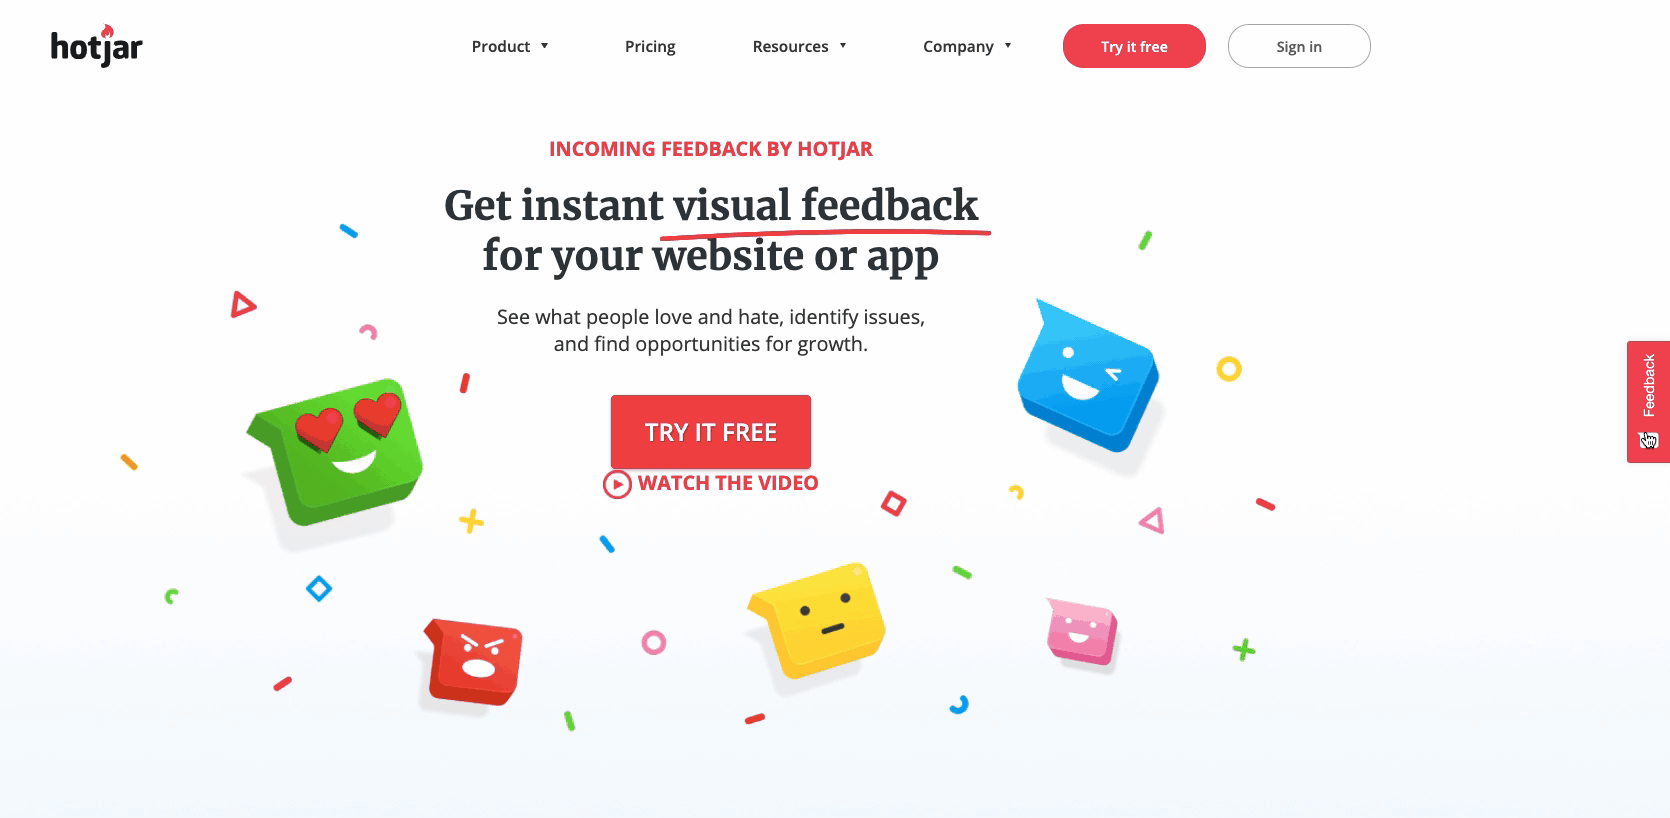 #Hotjar’s incoming feedback widget lets you collect voice of the customer (voc) feedback.